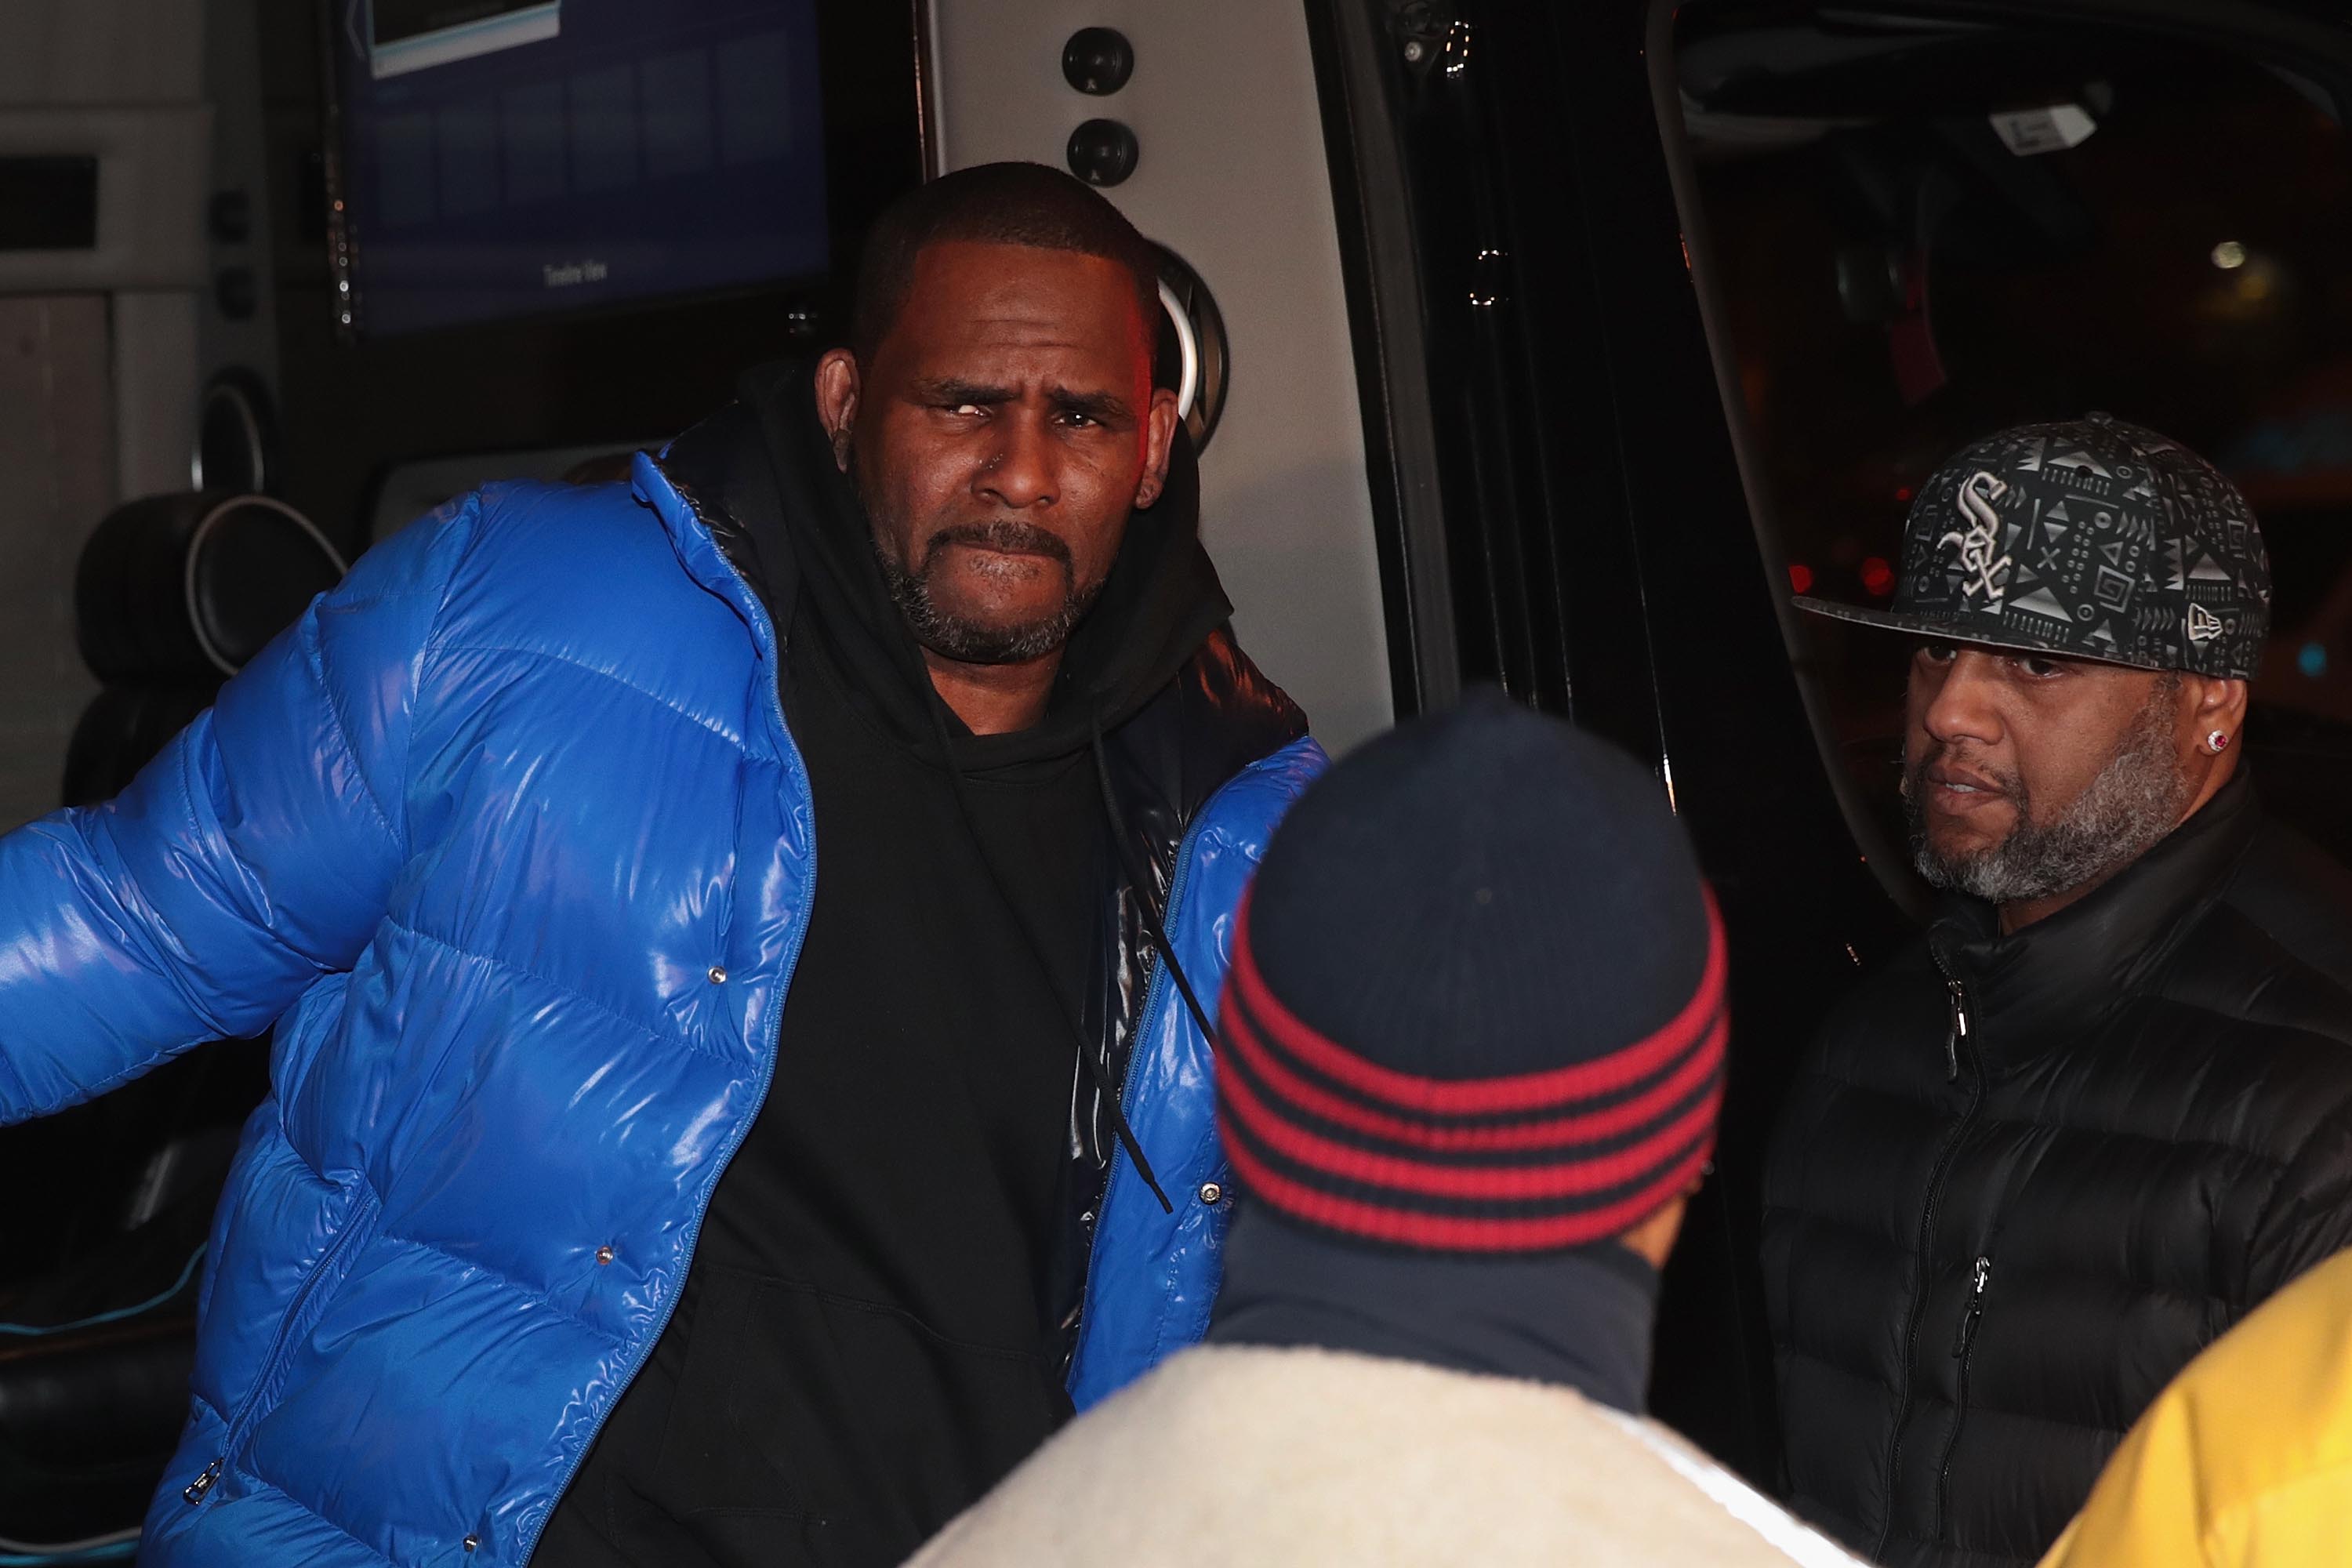 R. Kelly, charged with sexually abusing underage victims, has turned himself in